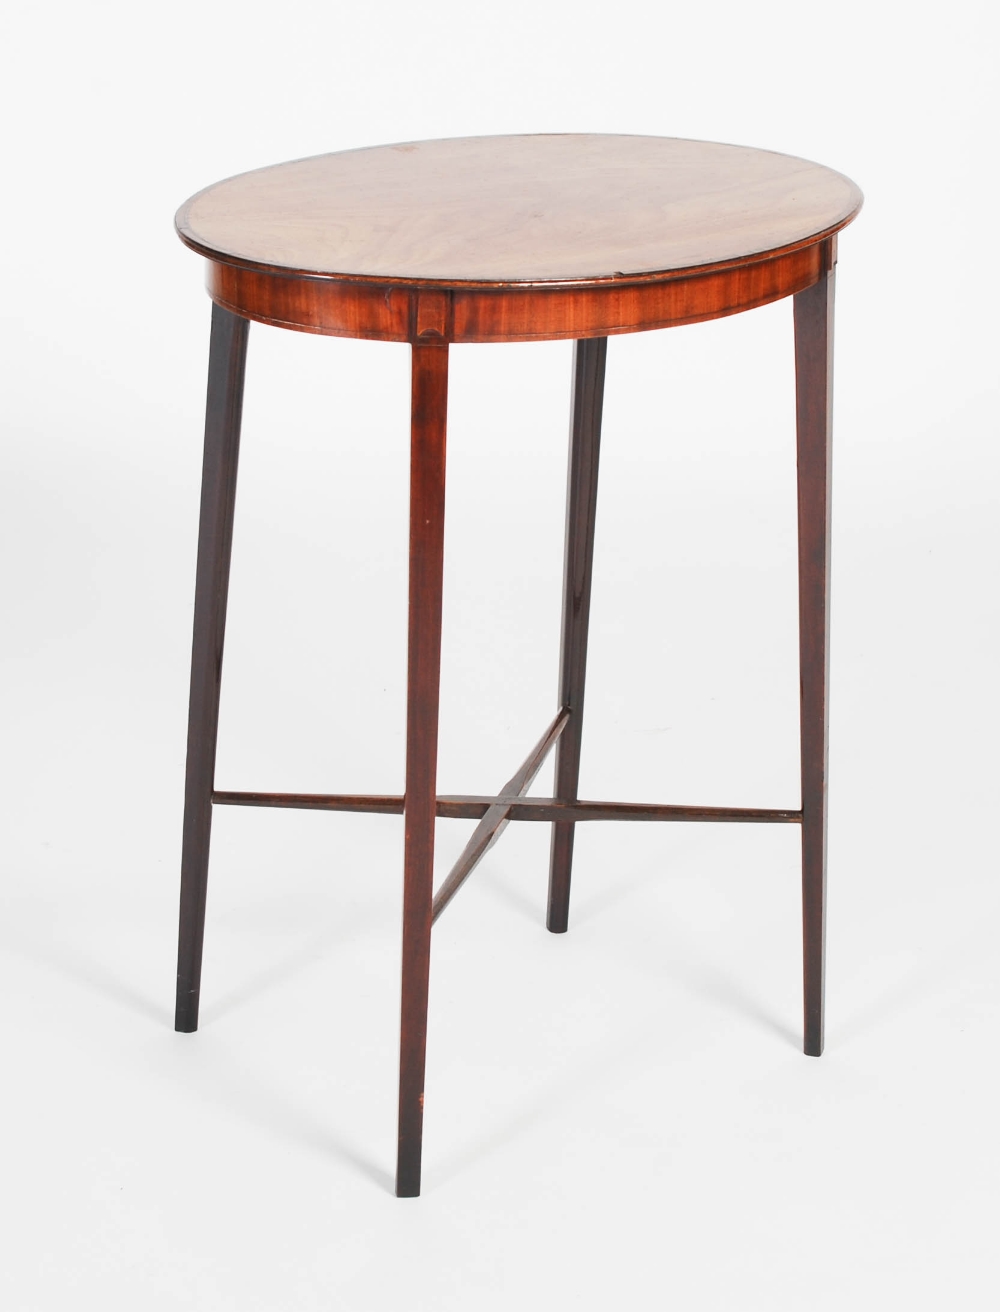 A 19th century mahogany occasional table, the oval-shaped top with boxwood lined and rosewood banded